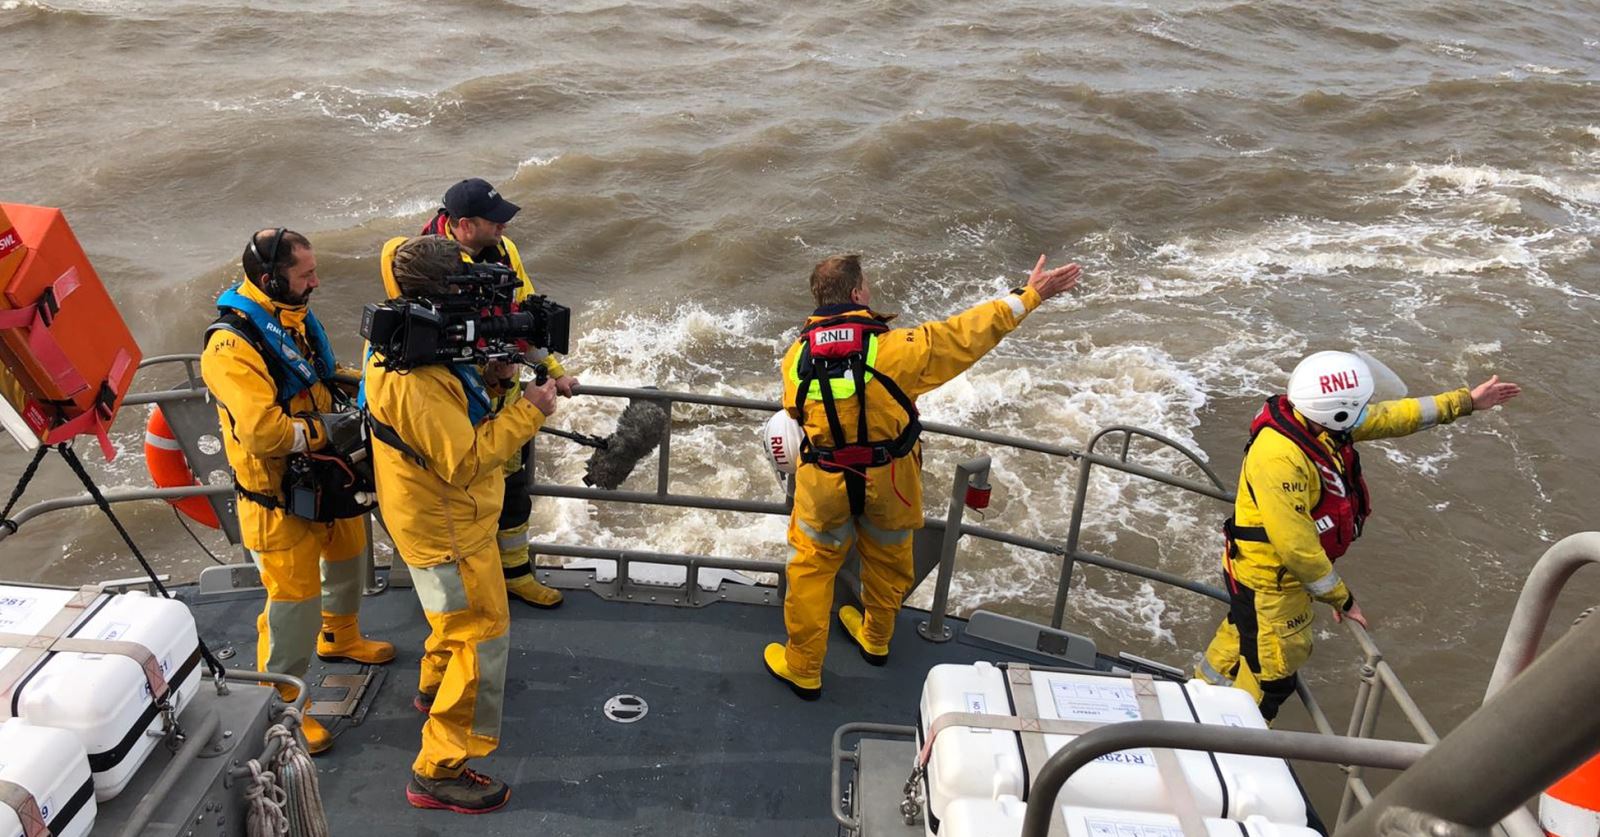 Welcome back to GTC member Ben Rowland, seen here filming with the Humber RNLI